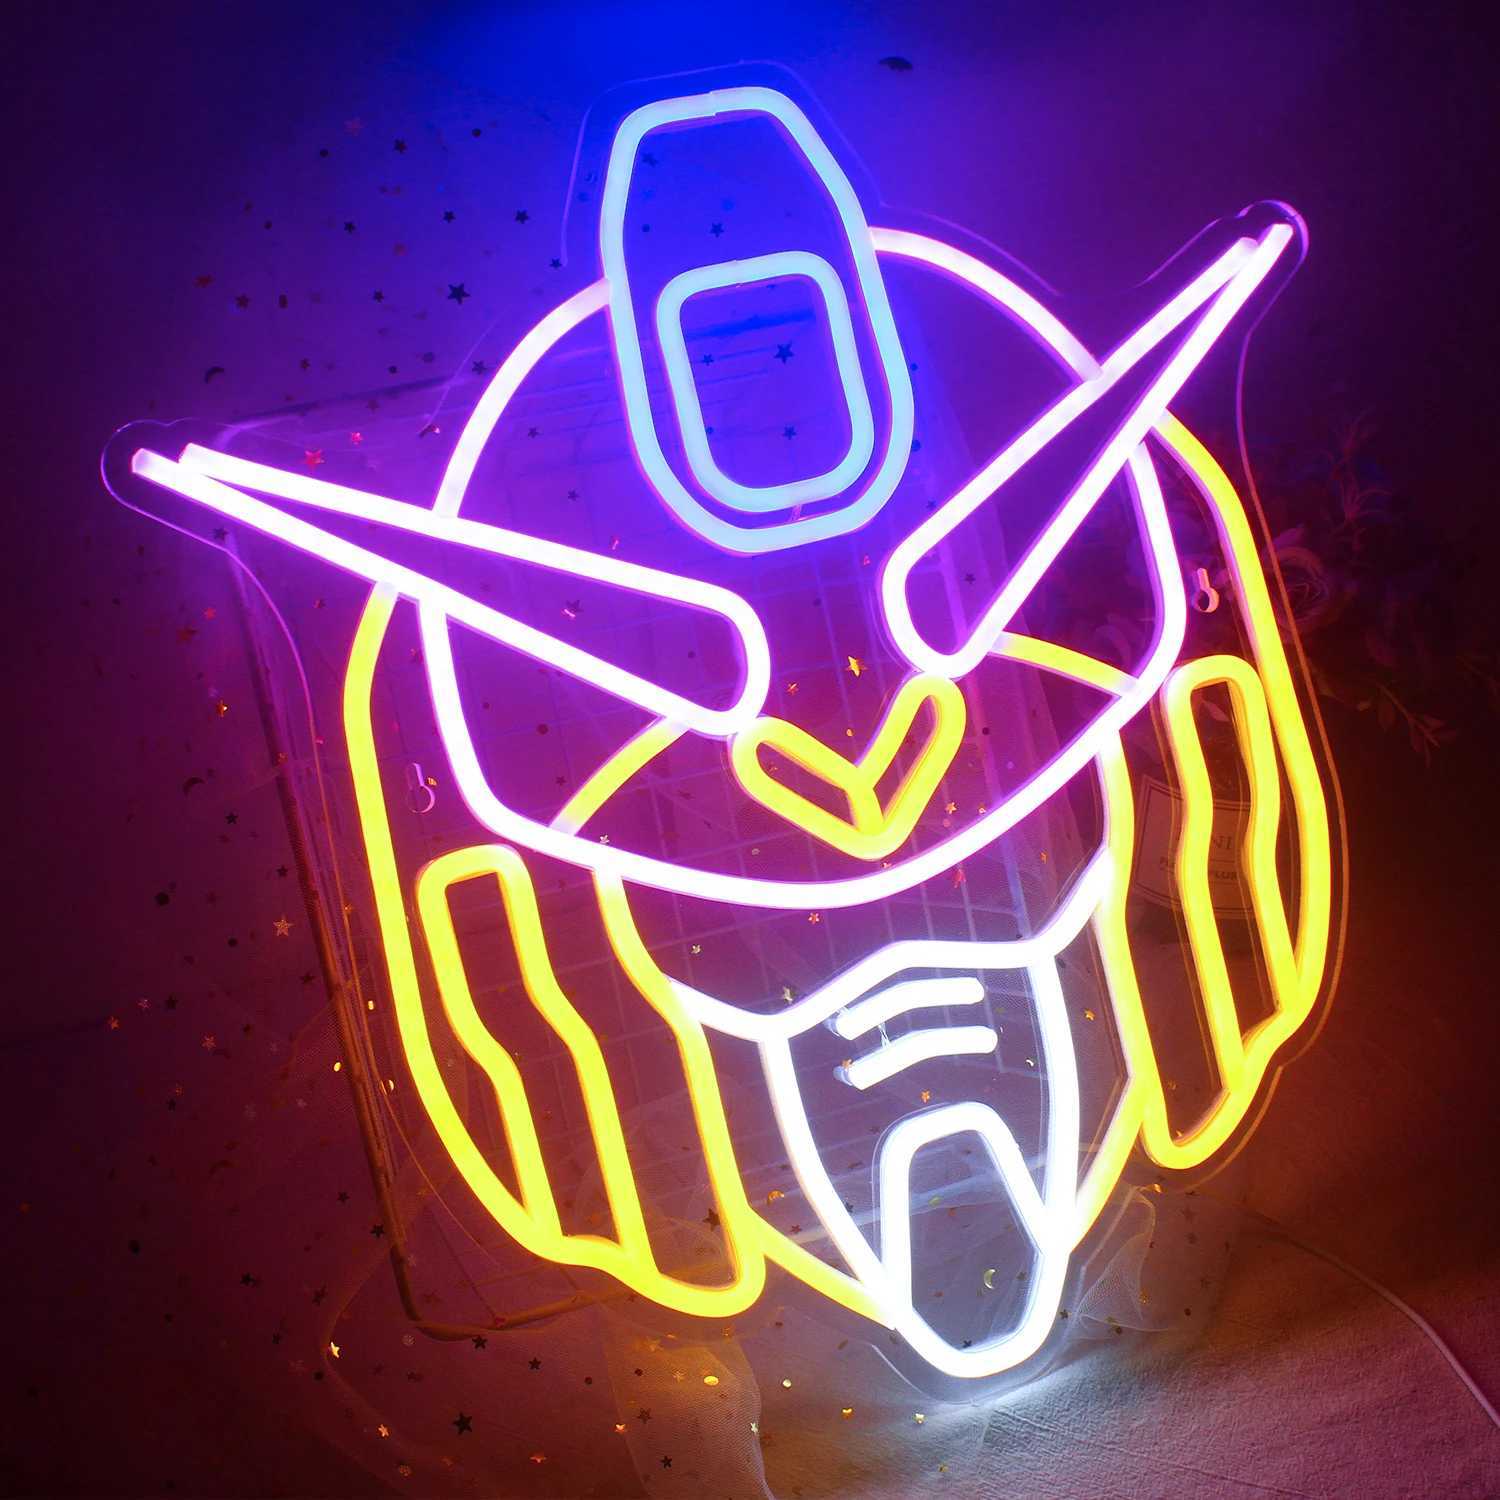 LED NEON Sign ineonlife Transformers Neon Sign LED LED Light Bedroom Letters USB Room Room Bar Barty Indoor Home Arcade Shop Art Wall Decoration YQ240126